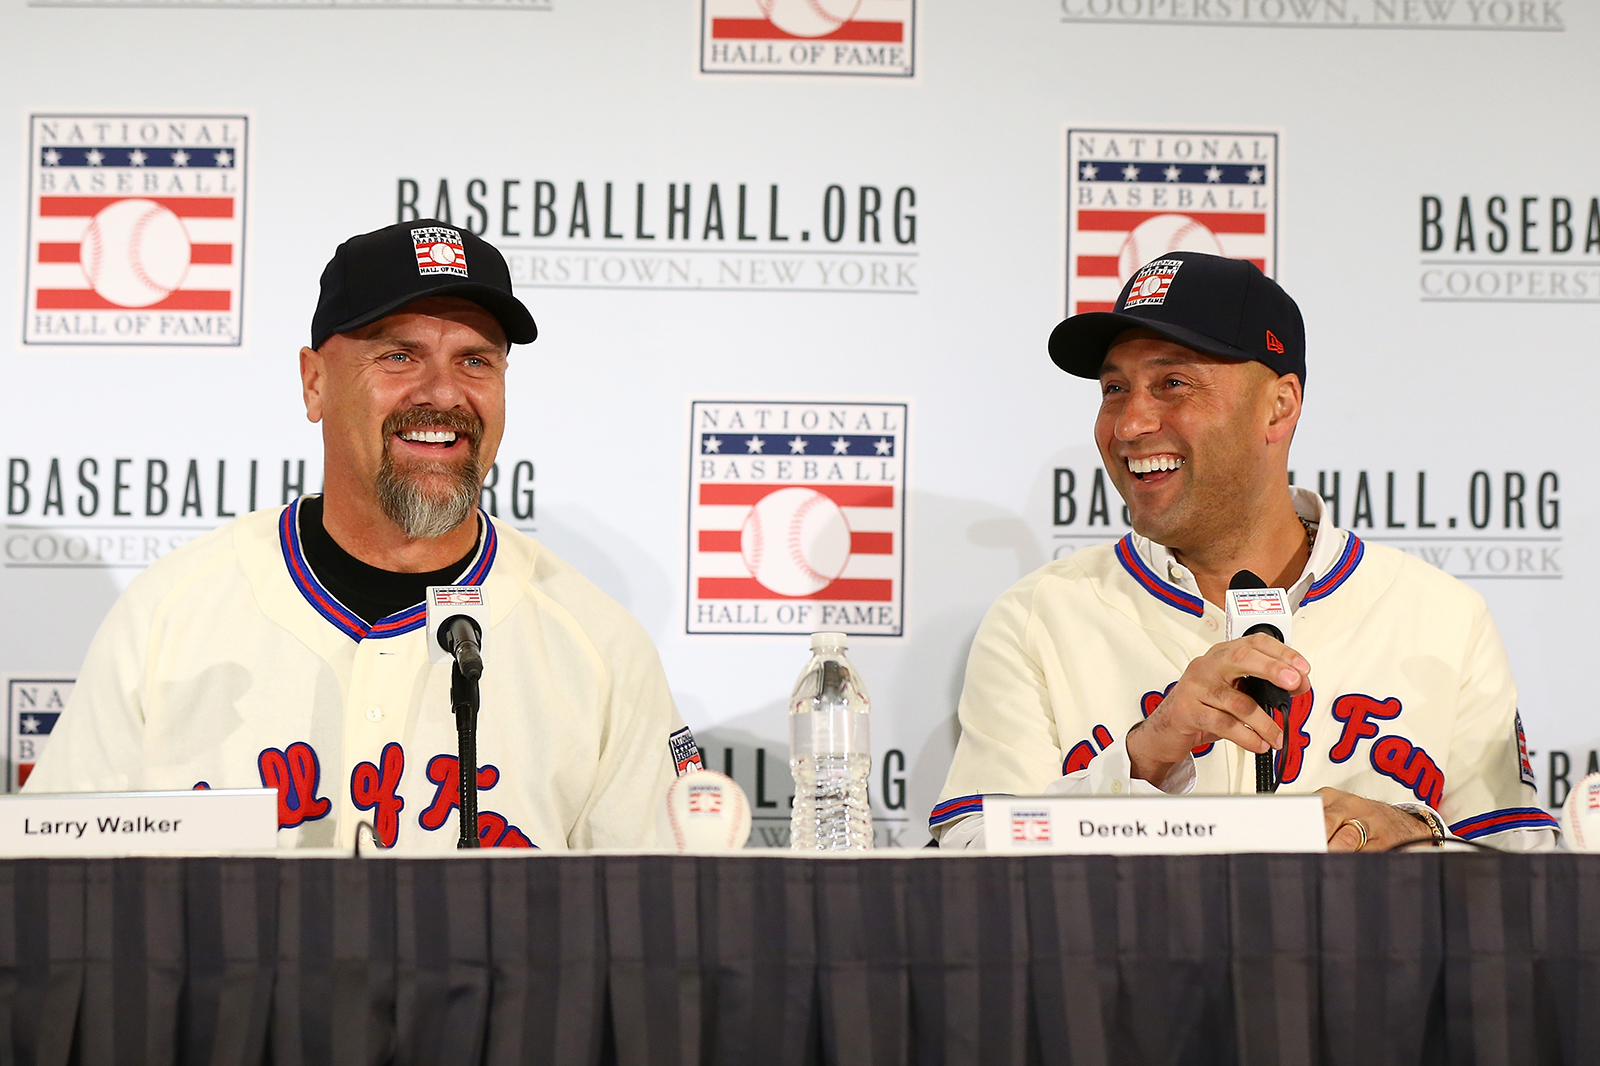 Larry Walker and Derek Jeter speak to the media after being elected into the National Baseball Hall of Fame Class of 2020 on January 22, in New York City. 